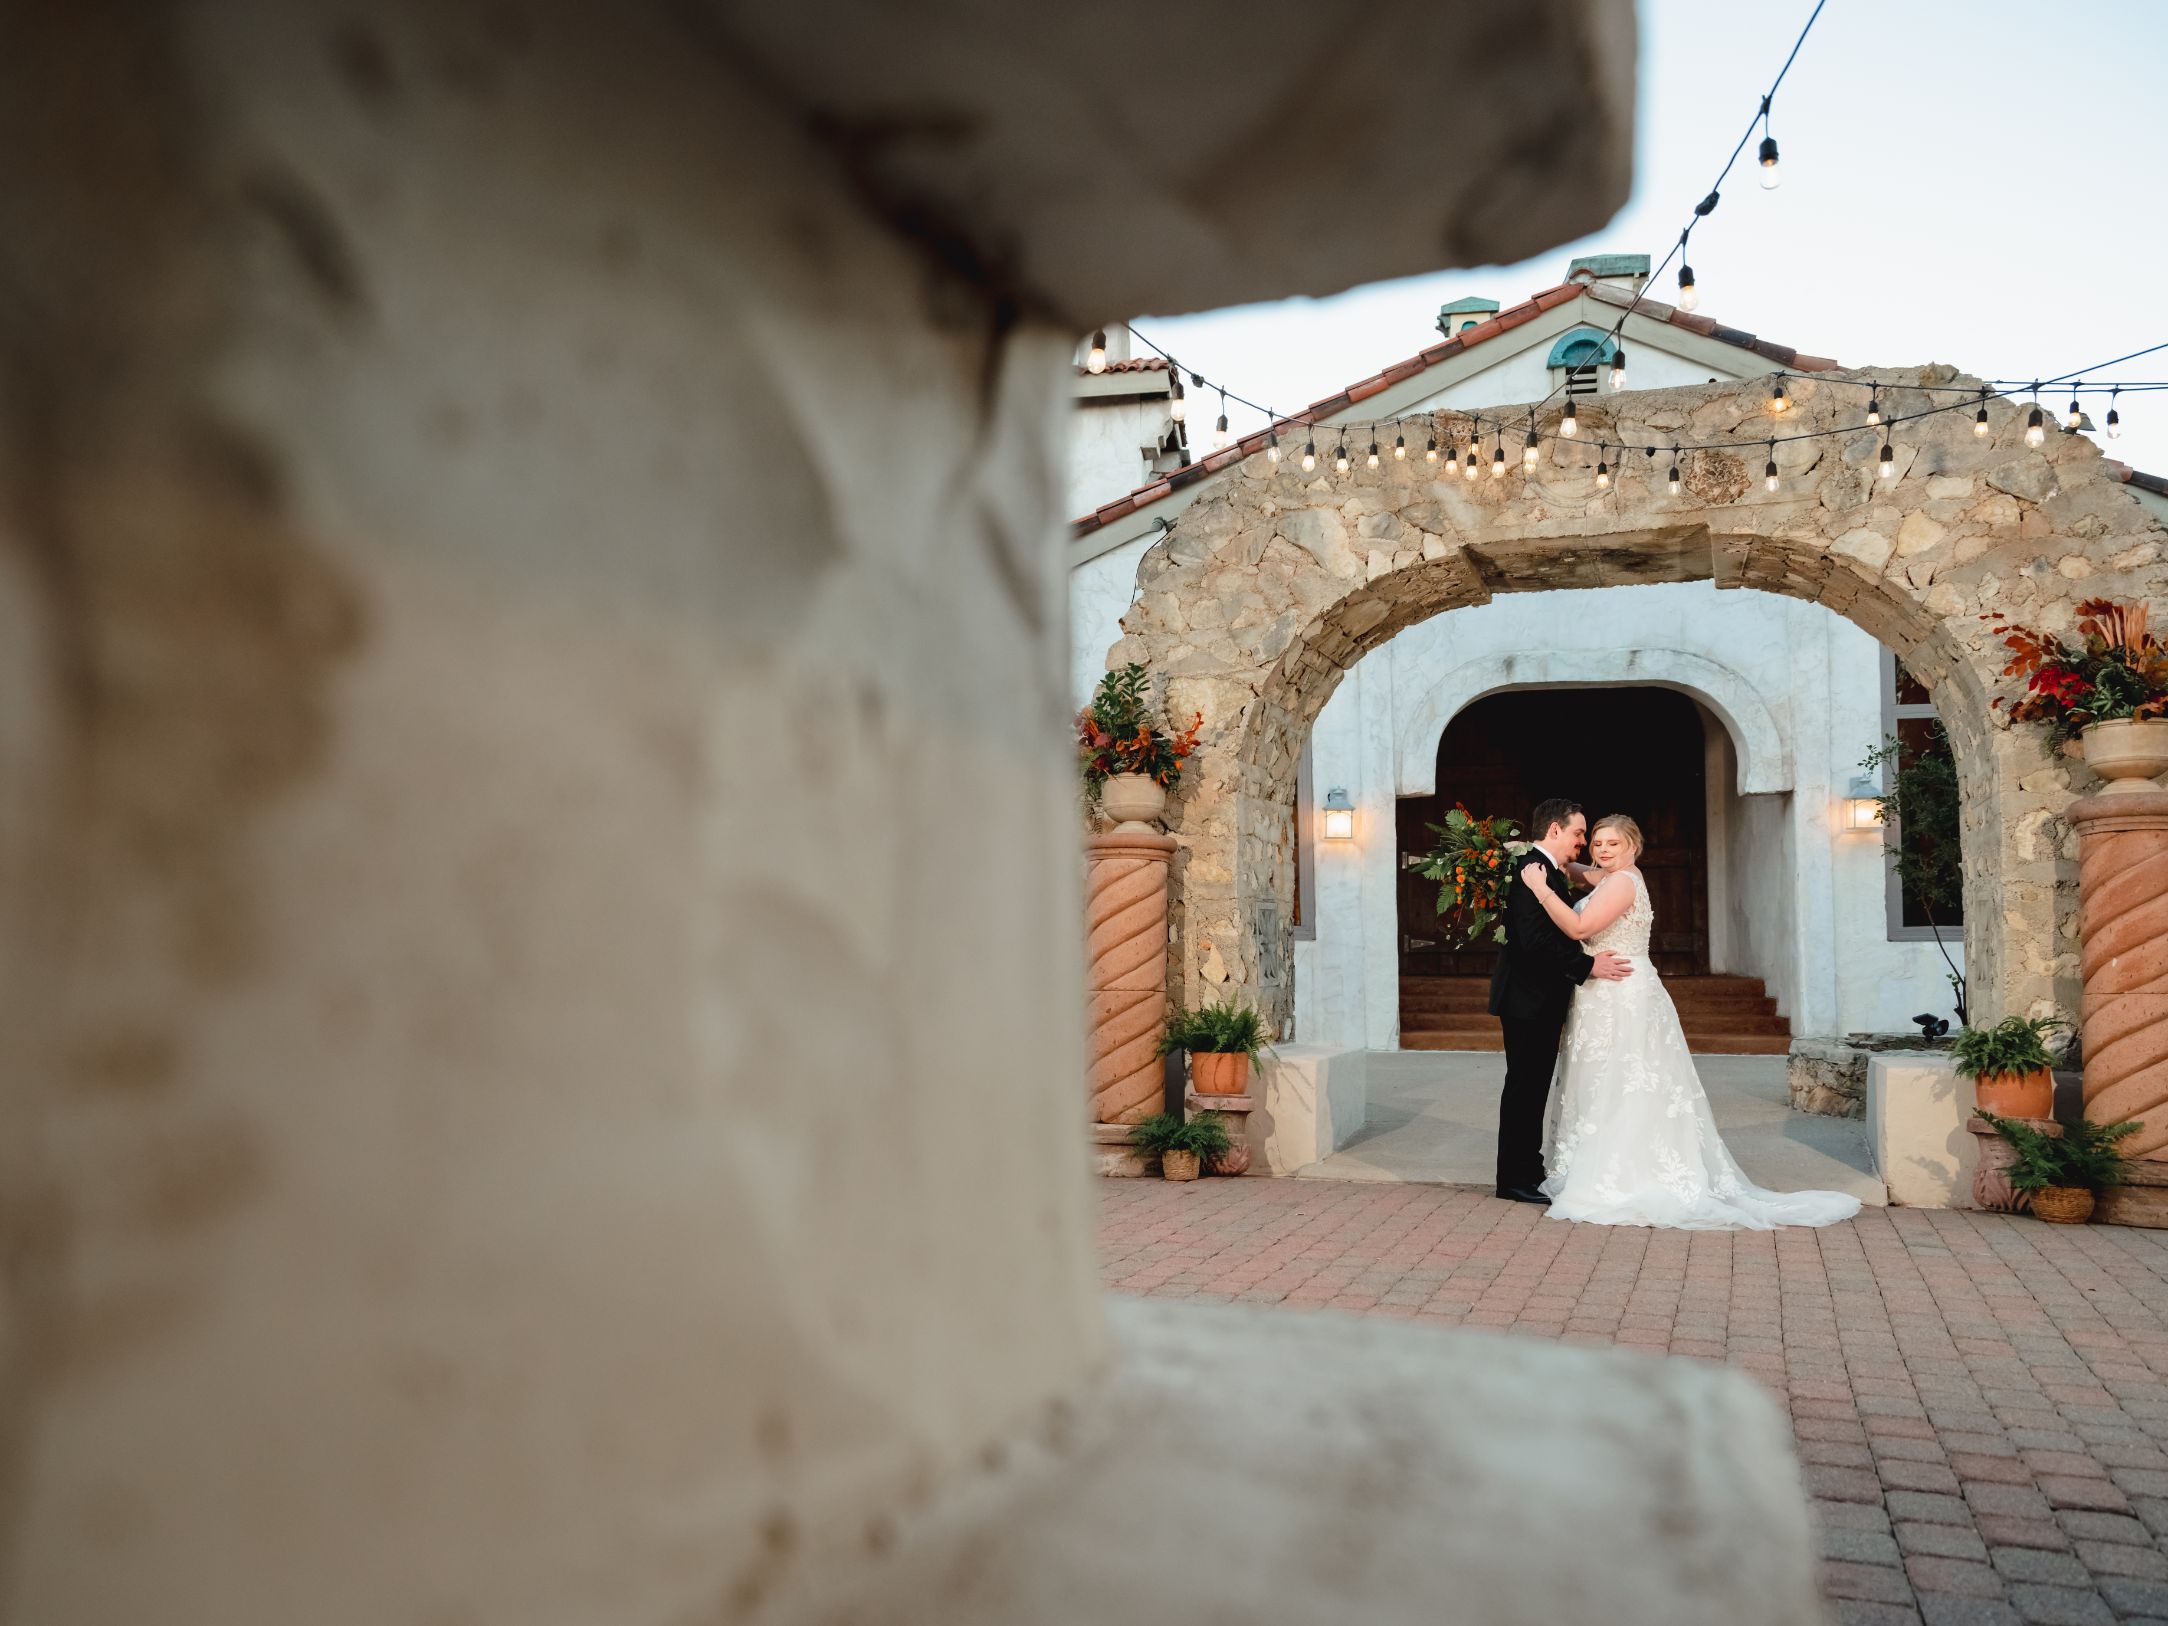 Bride and groom hold each other under a stone arch with stone pillars on each side and bistro light hanging above.